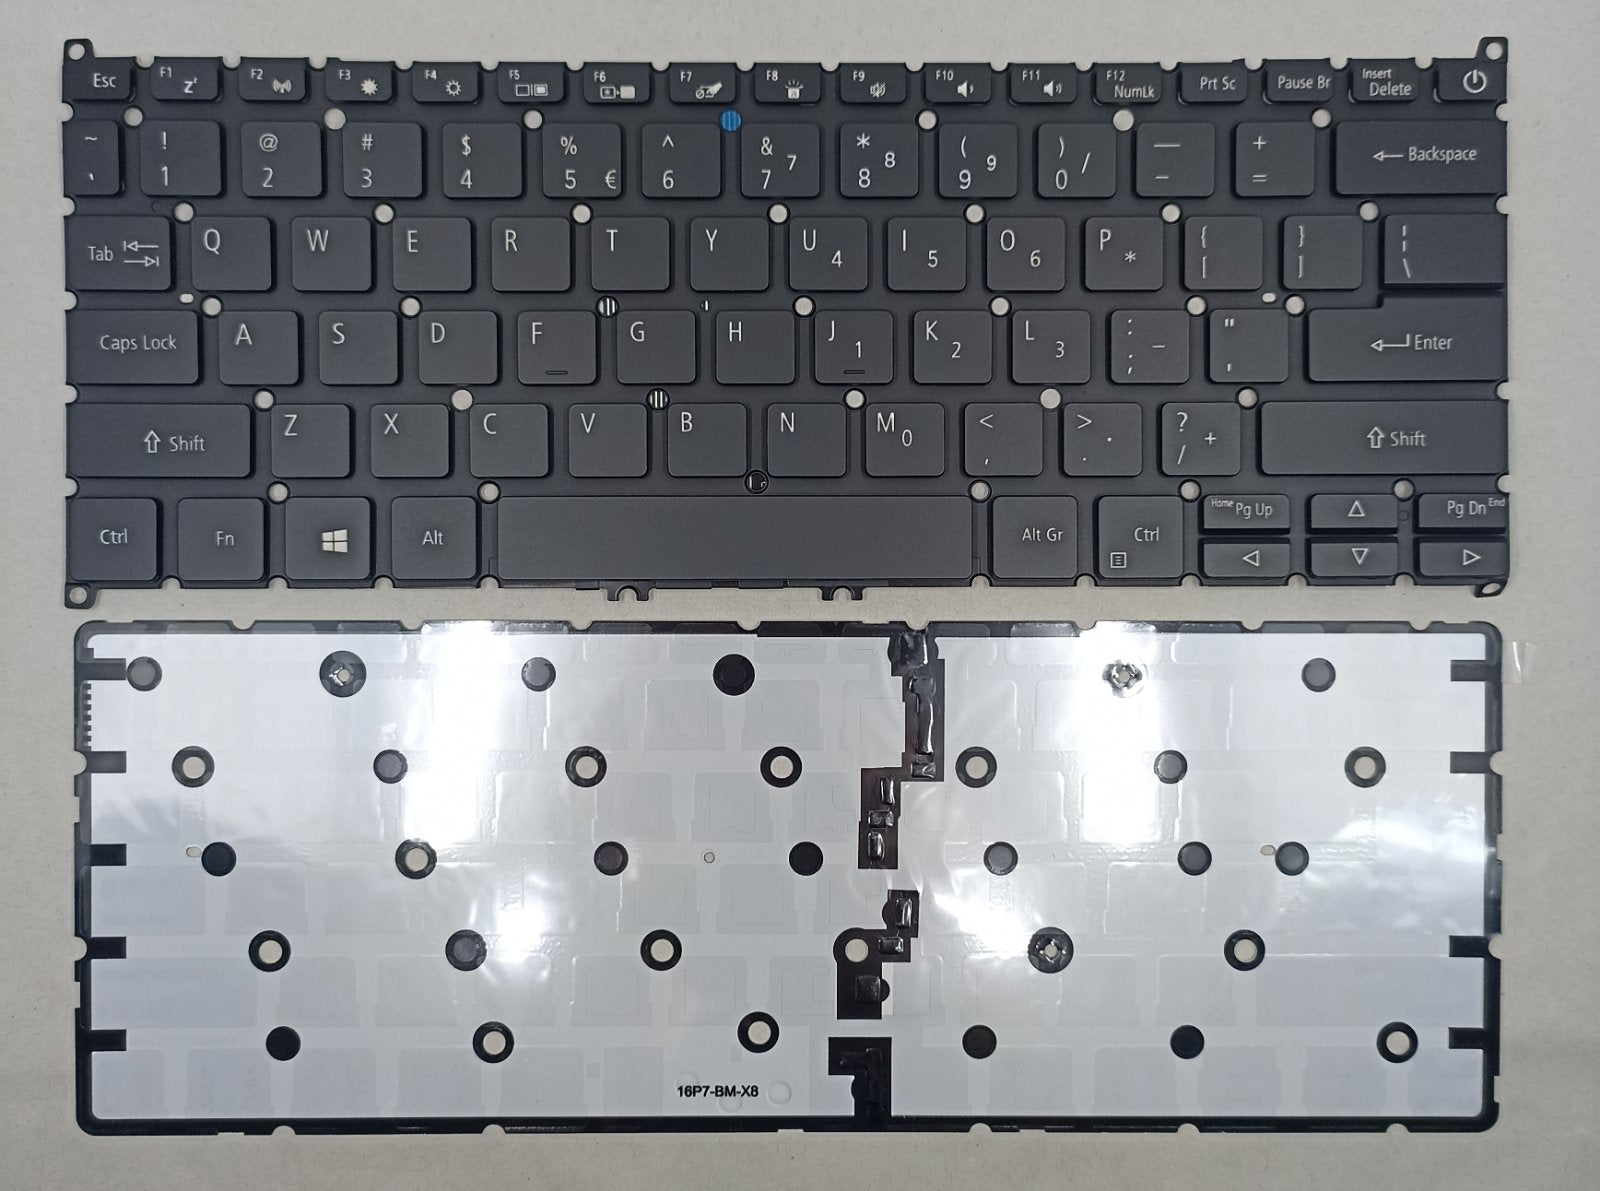 Keyboard Module for Acer A314-35 WL